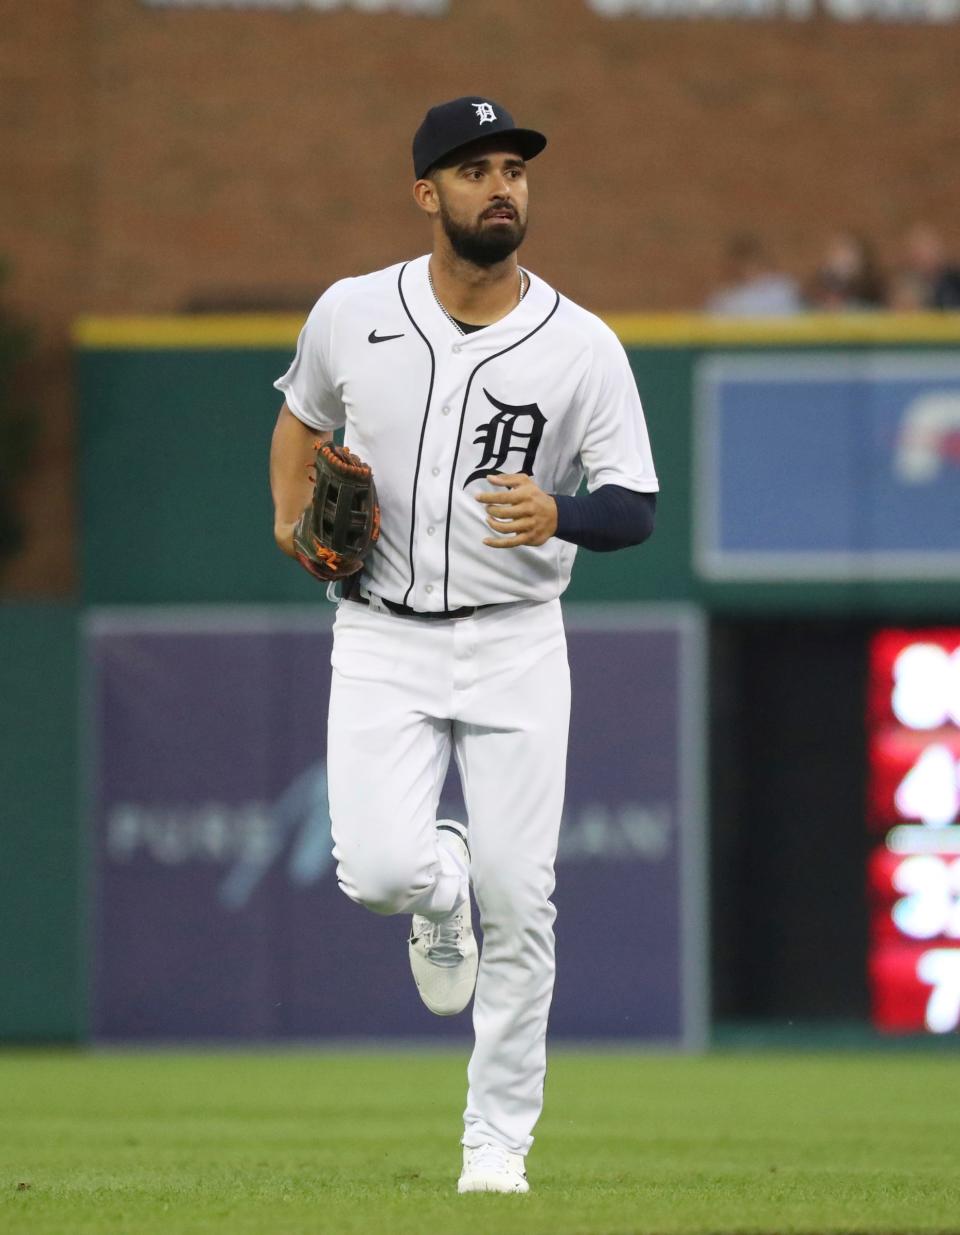 Detroit Tigers center fielder Riley Greene (31) runs off the field during third-inning action at Comerica Park in Detroit on Friday, July 1, 2022.